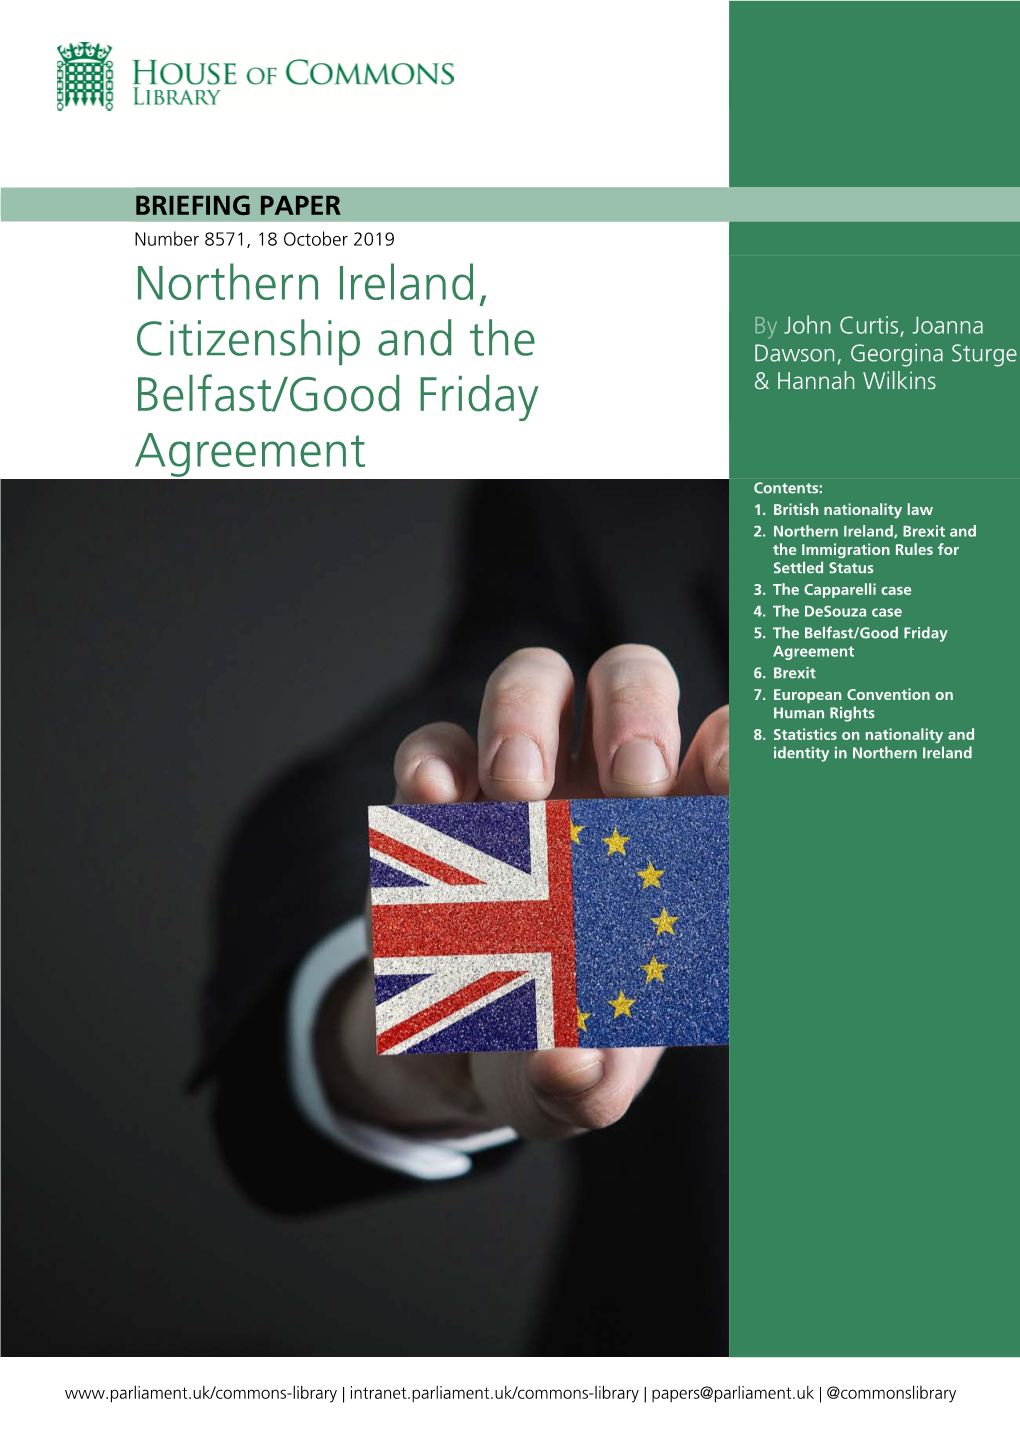 Northern Ireland, Citizenship and the Belfast/Good Friday Agreement